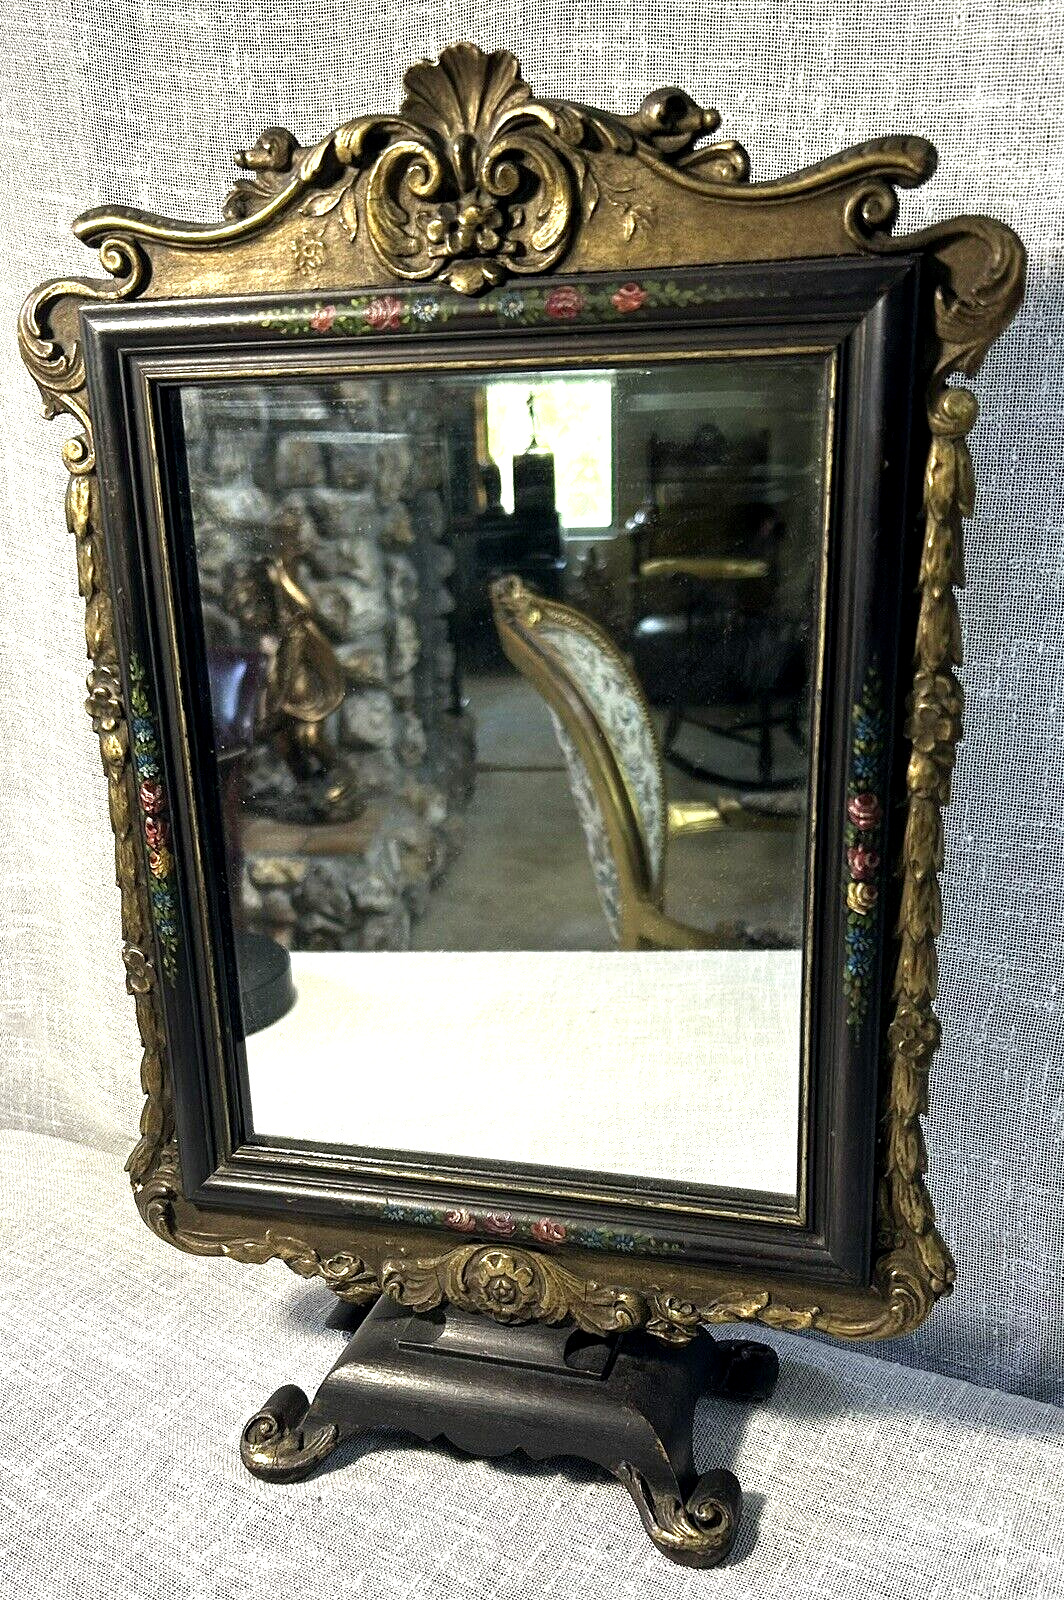 Antique French Ornate Black & Gold Vanity Mirror Hand Painted Flower Borders